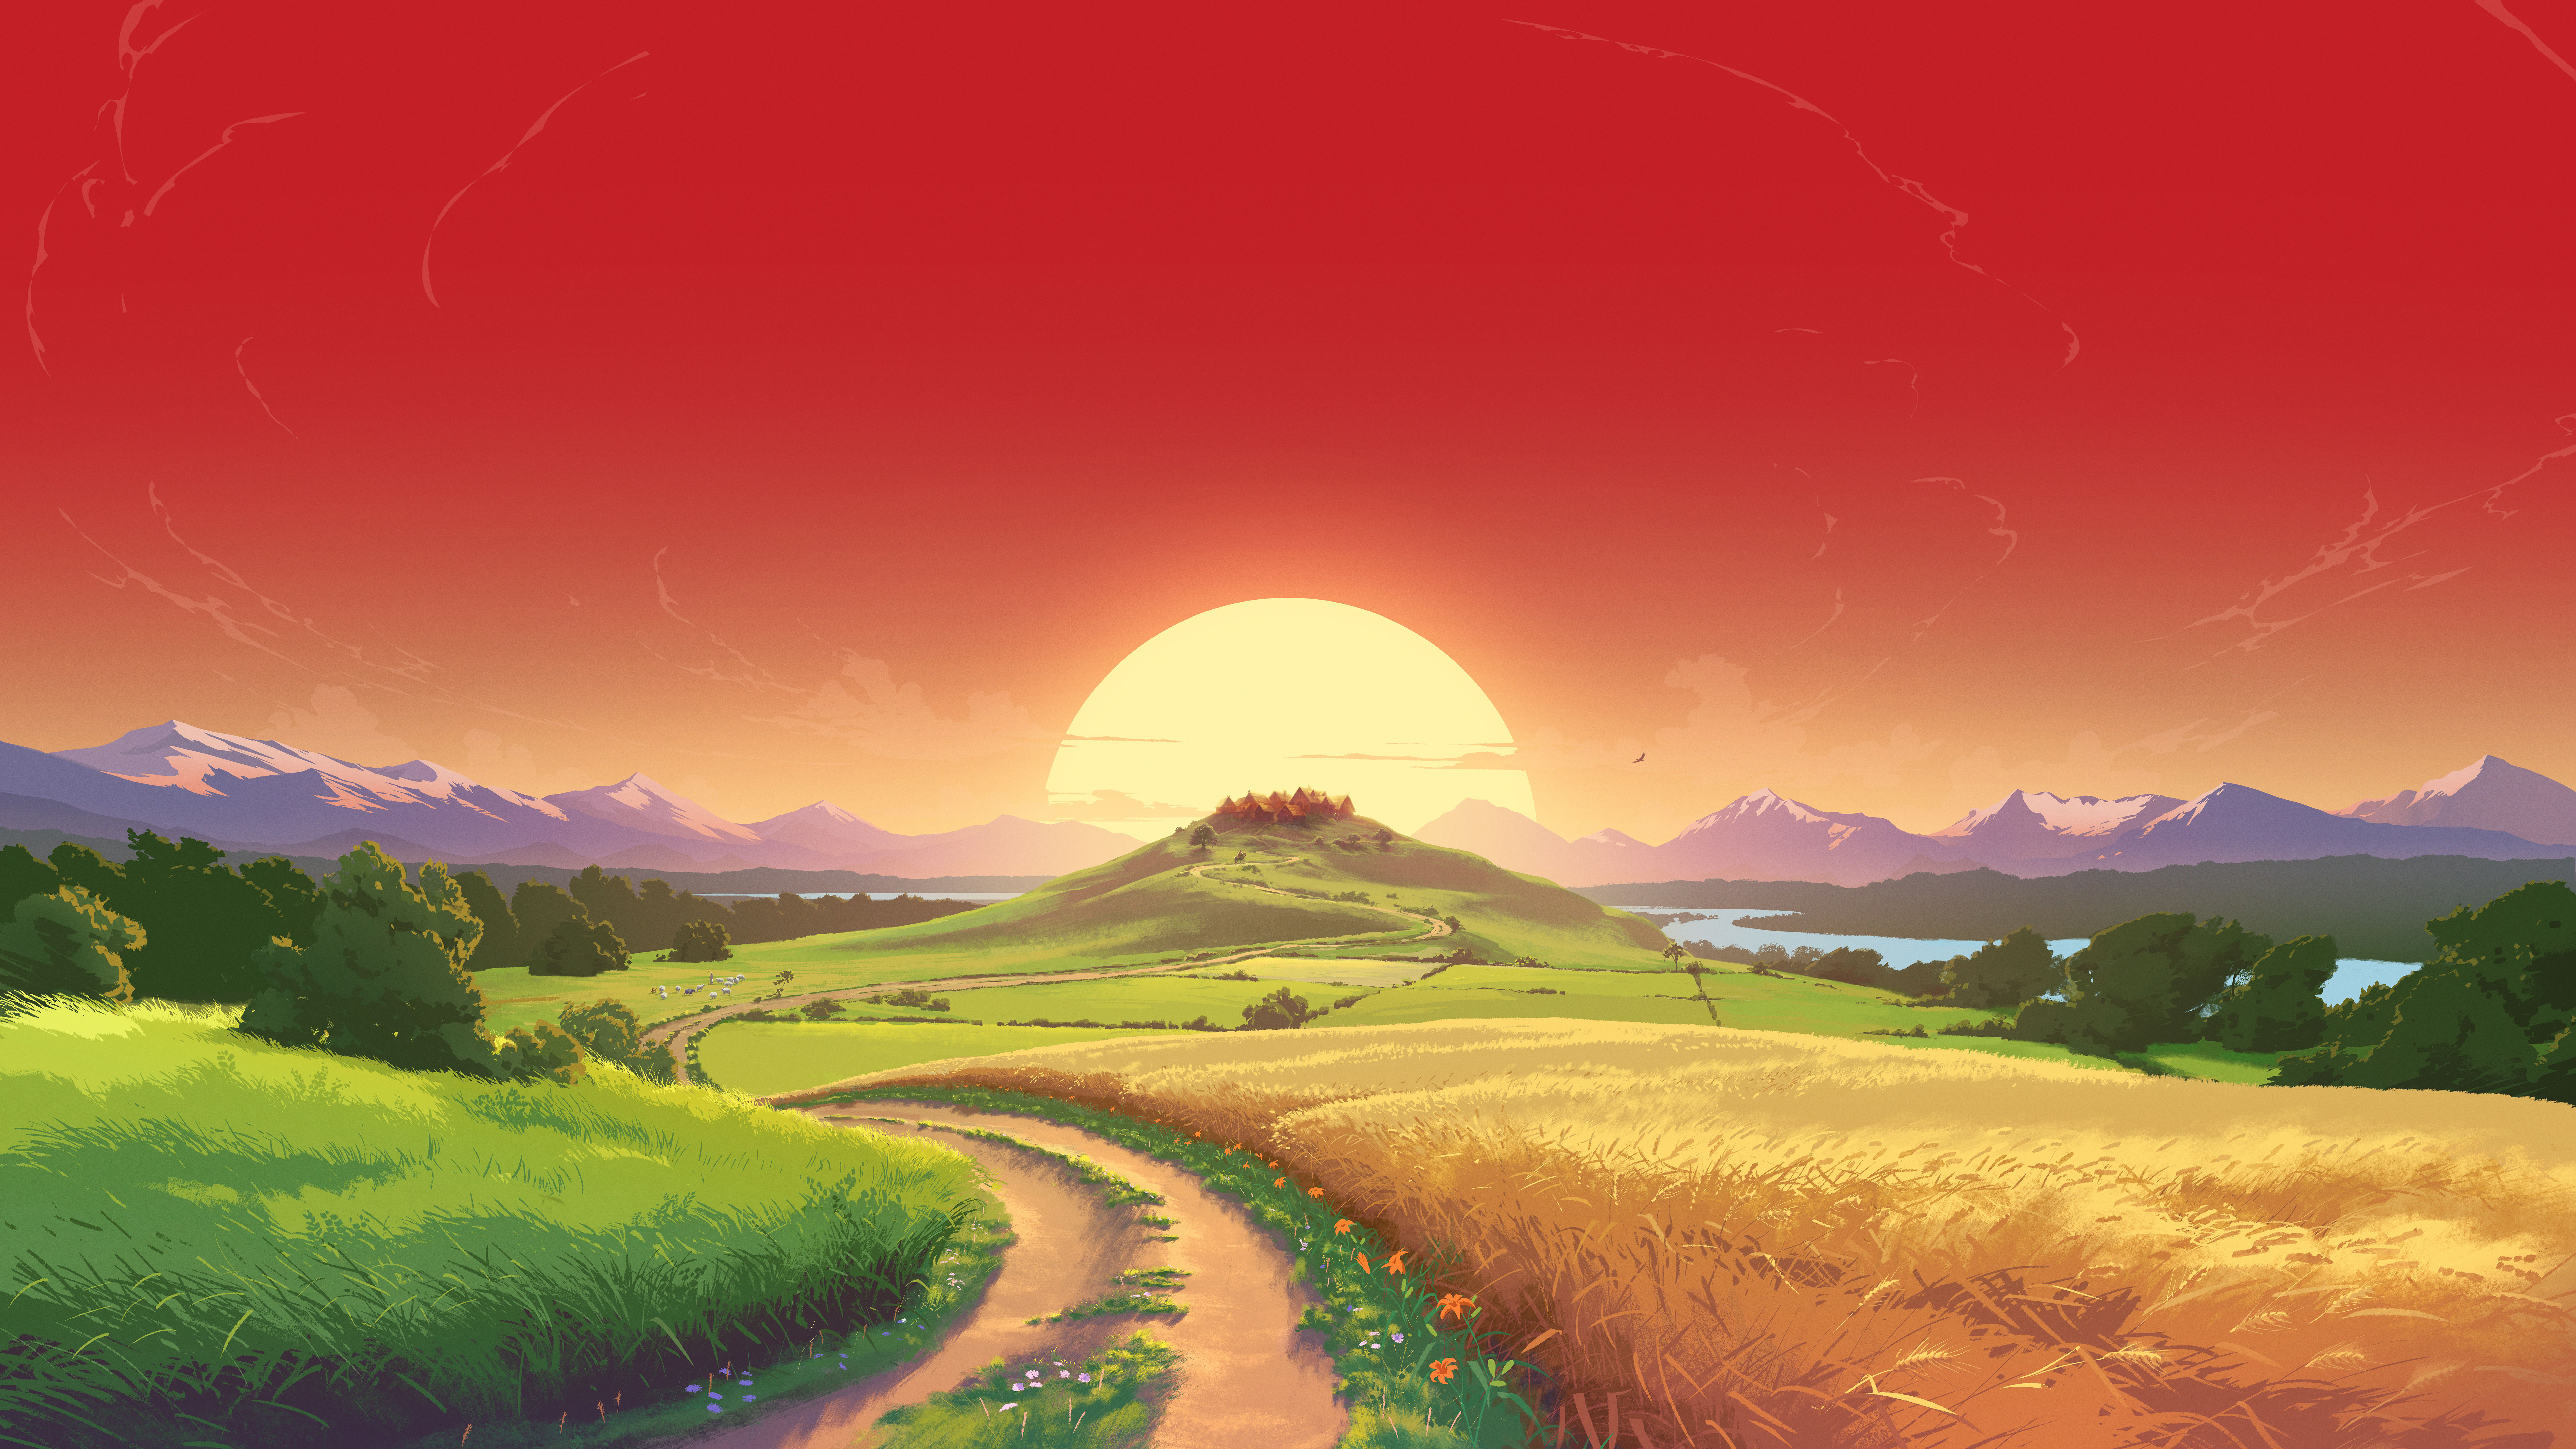 Nature Landscape Artwork Dirt Road Field Sun Trees Mountains Red Sky Hill House Horse Riding Sunset  7680x4320